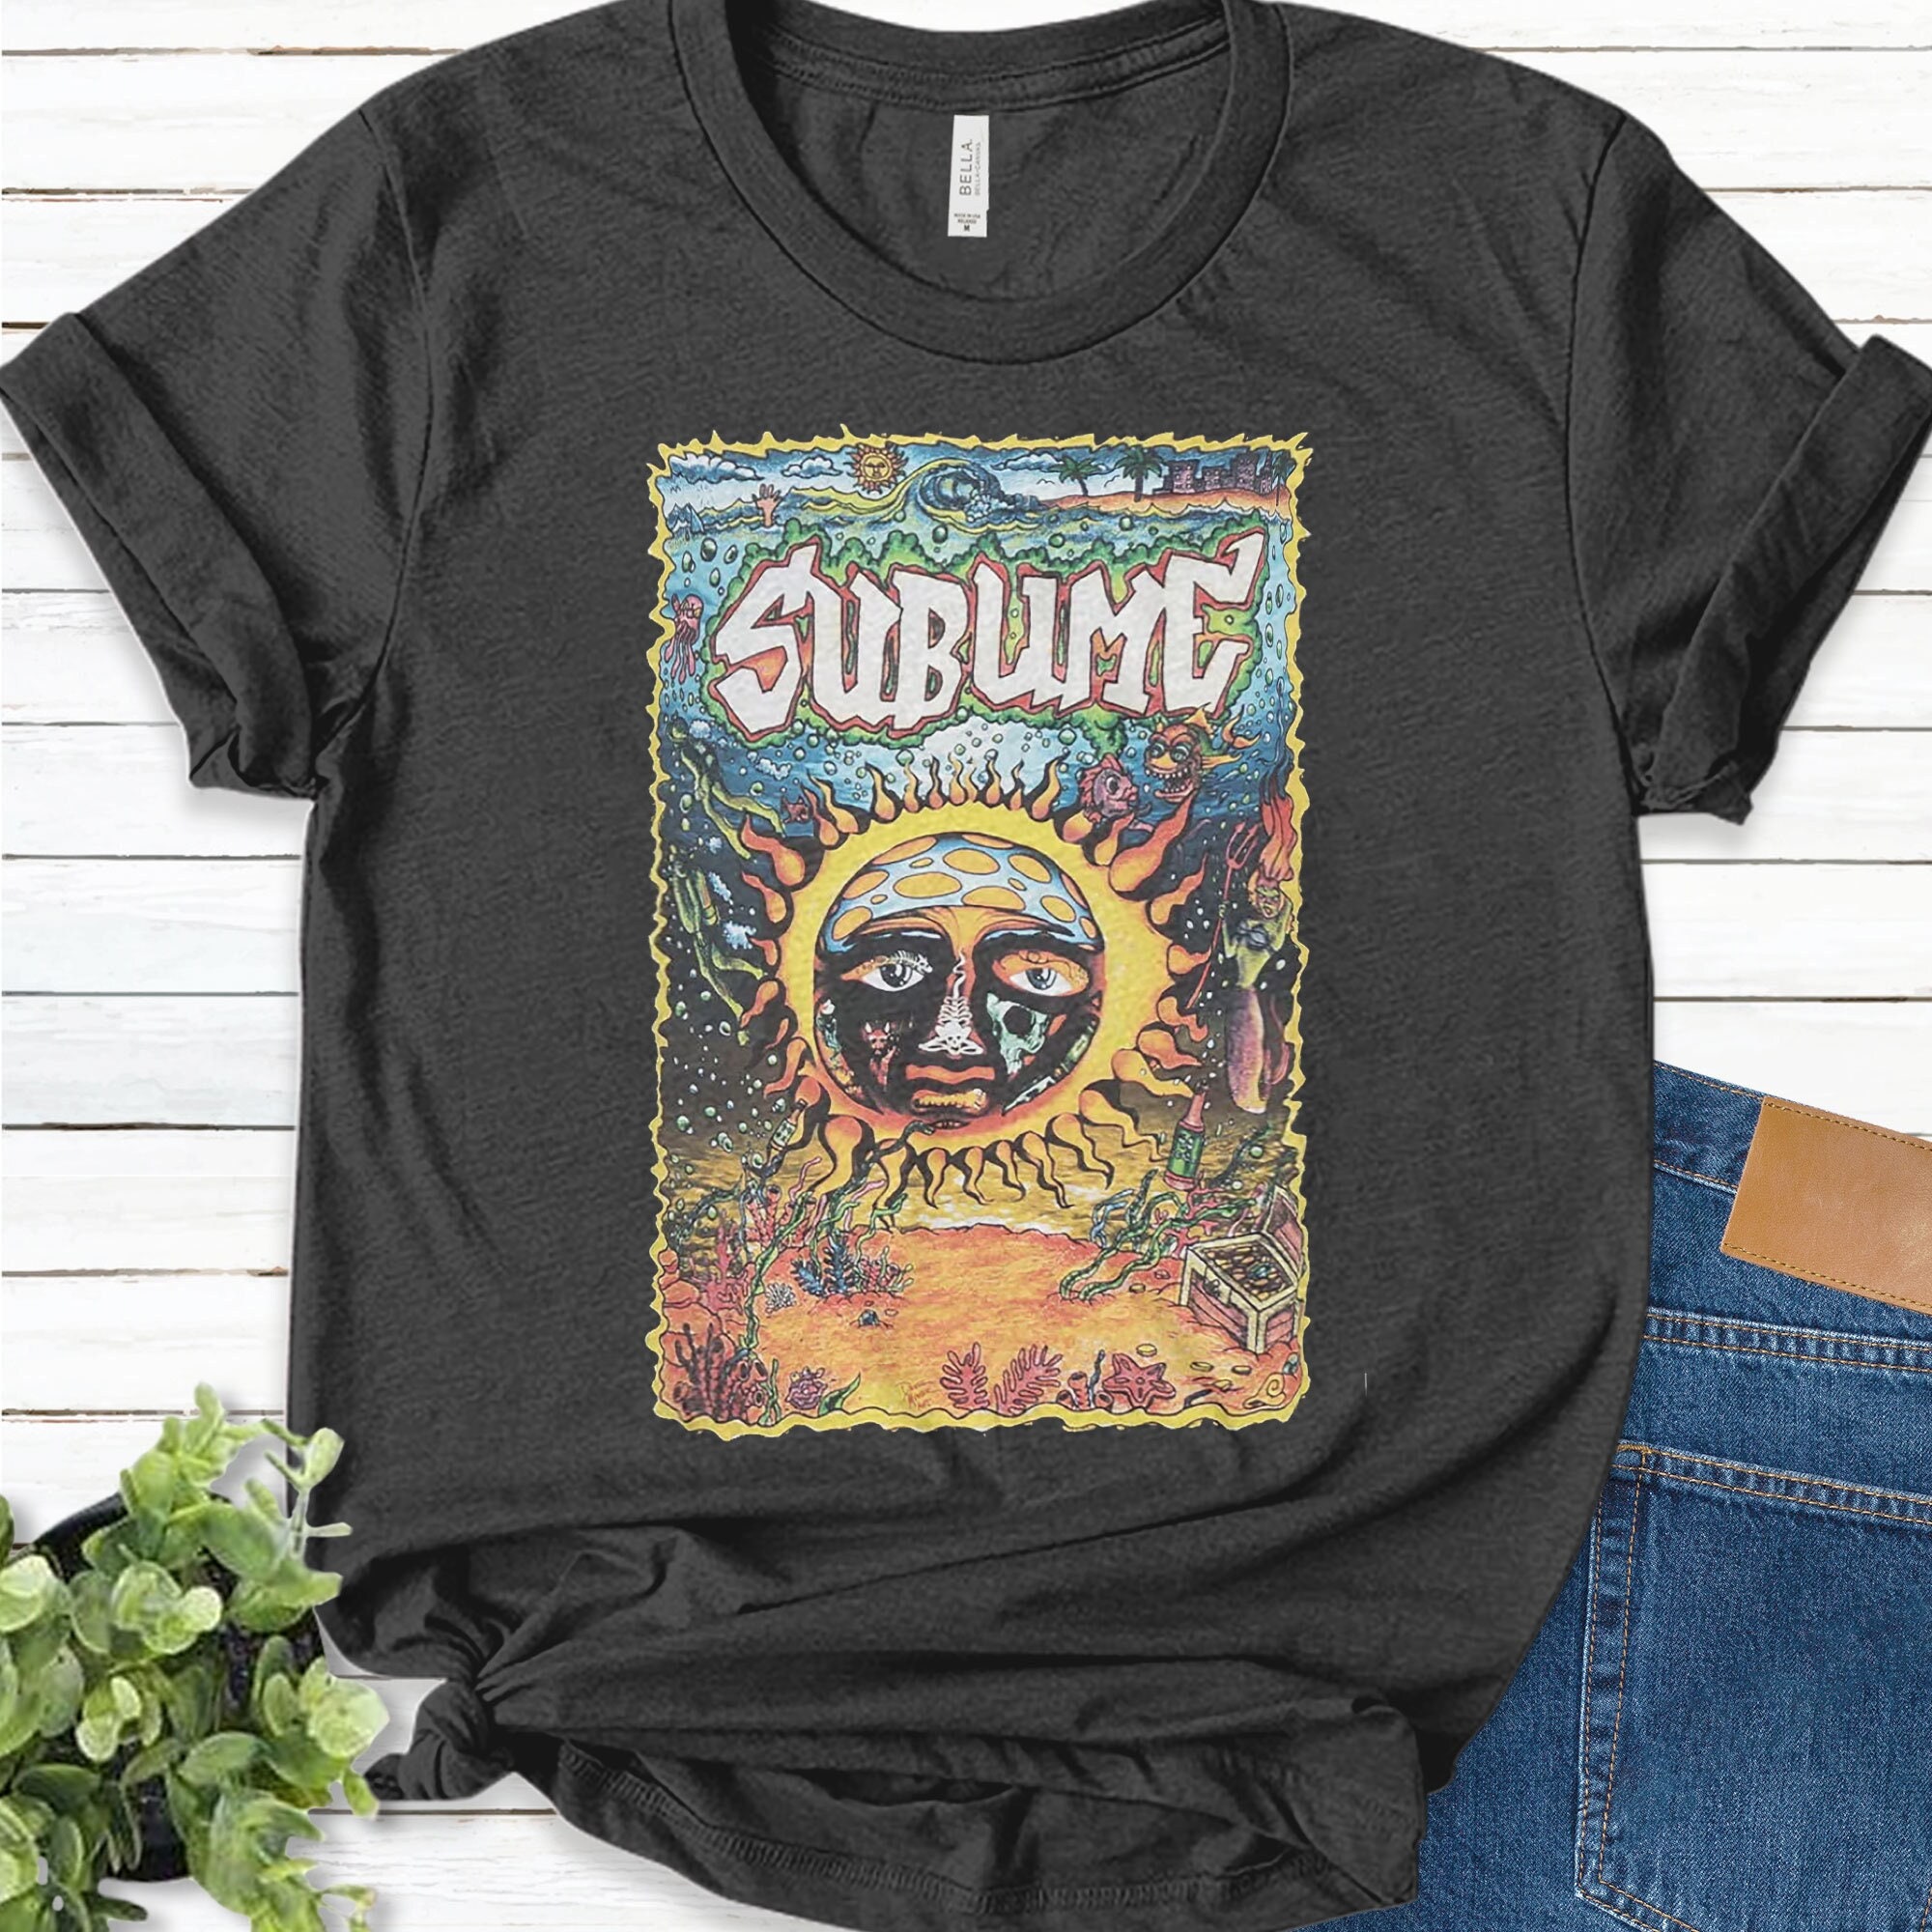 Sublime Band Tee Rock and Roll sublime WOMEN Vintage Band | Etsy